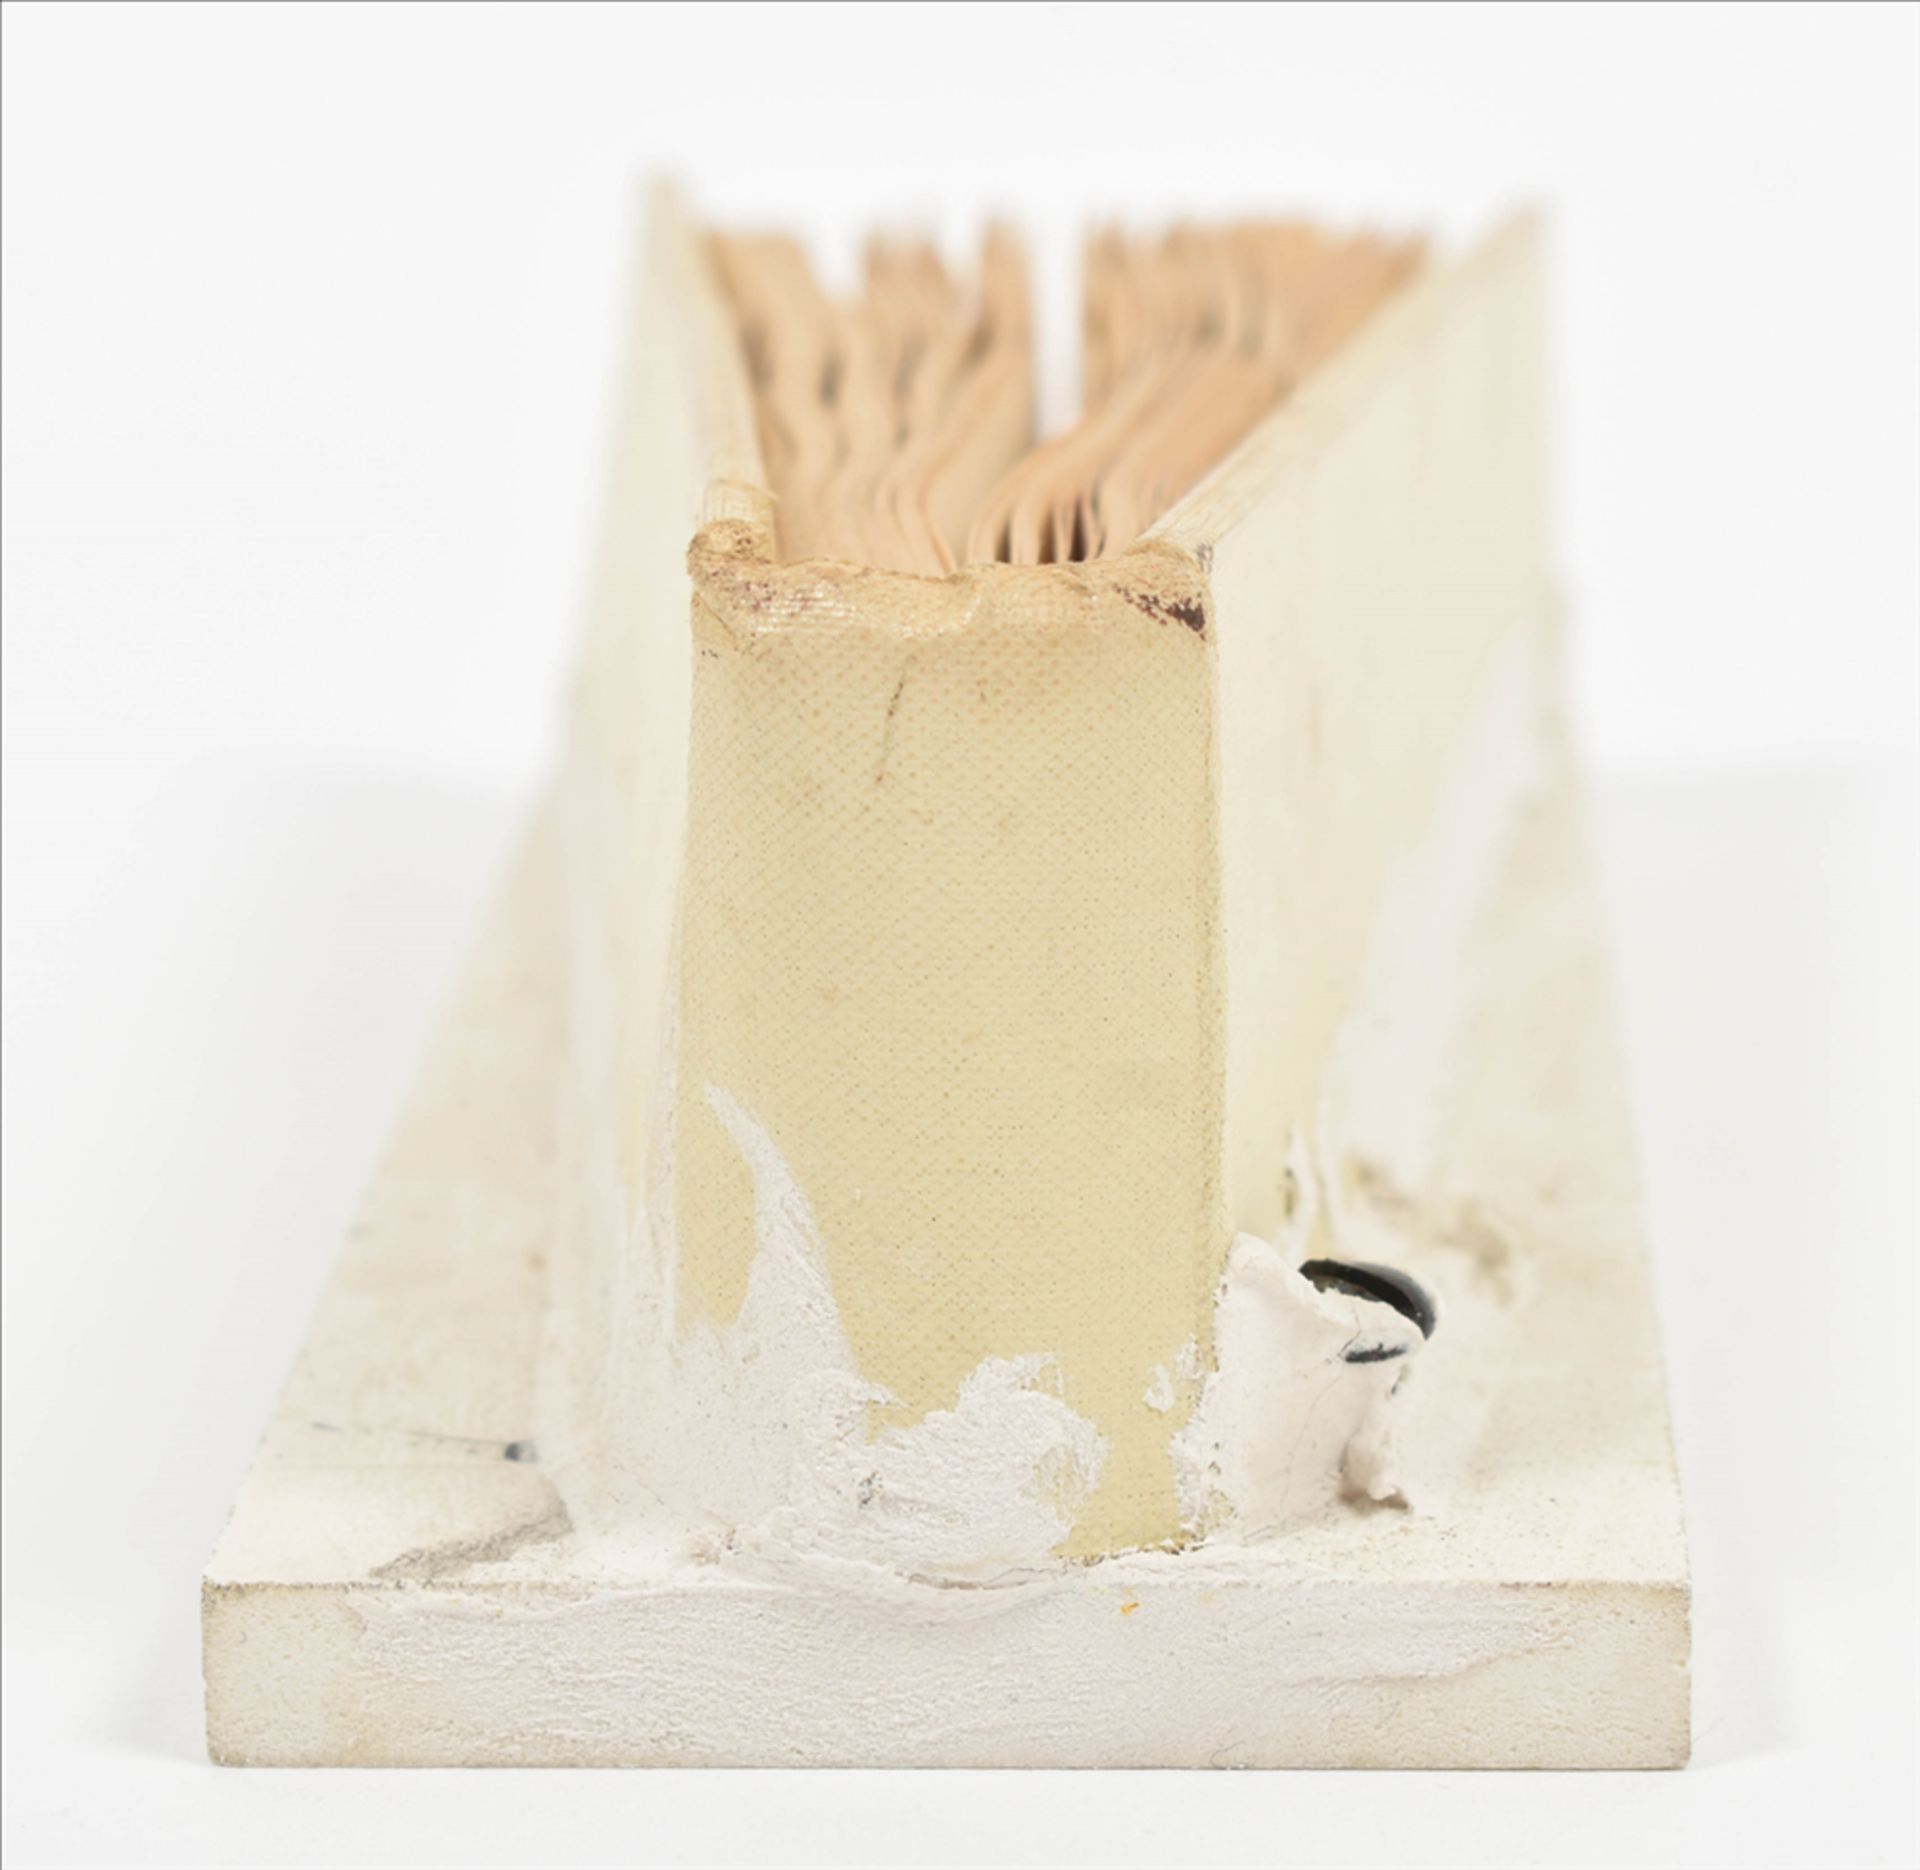 John Latham, two book sculptures, ca. 1983 - Image 2 of 6